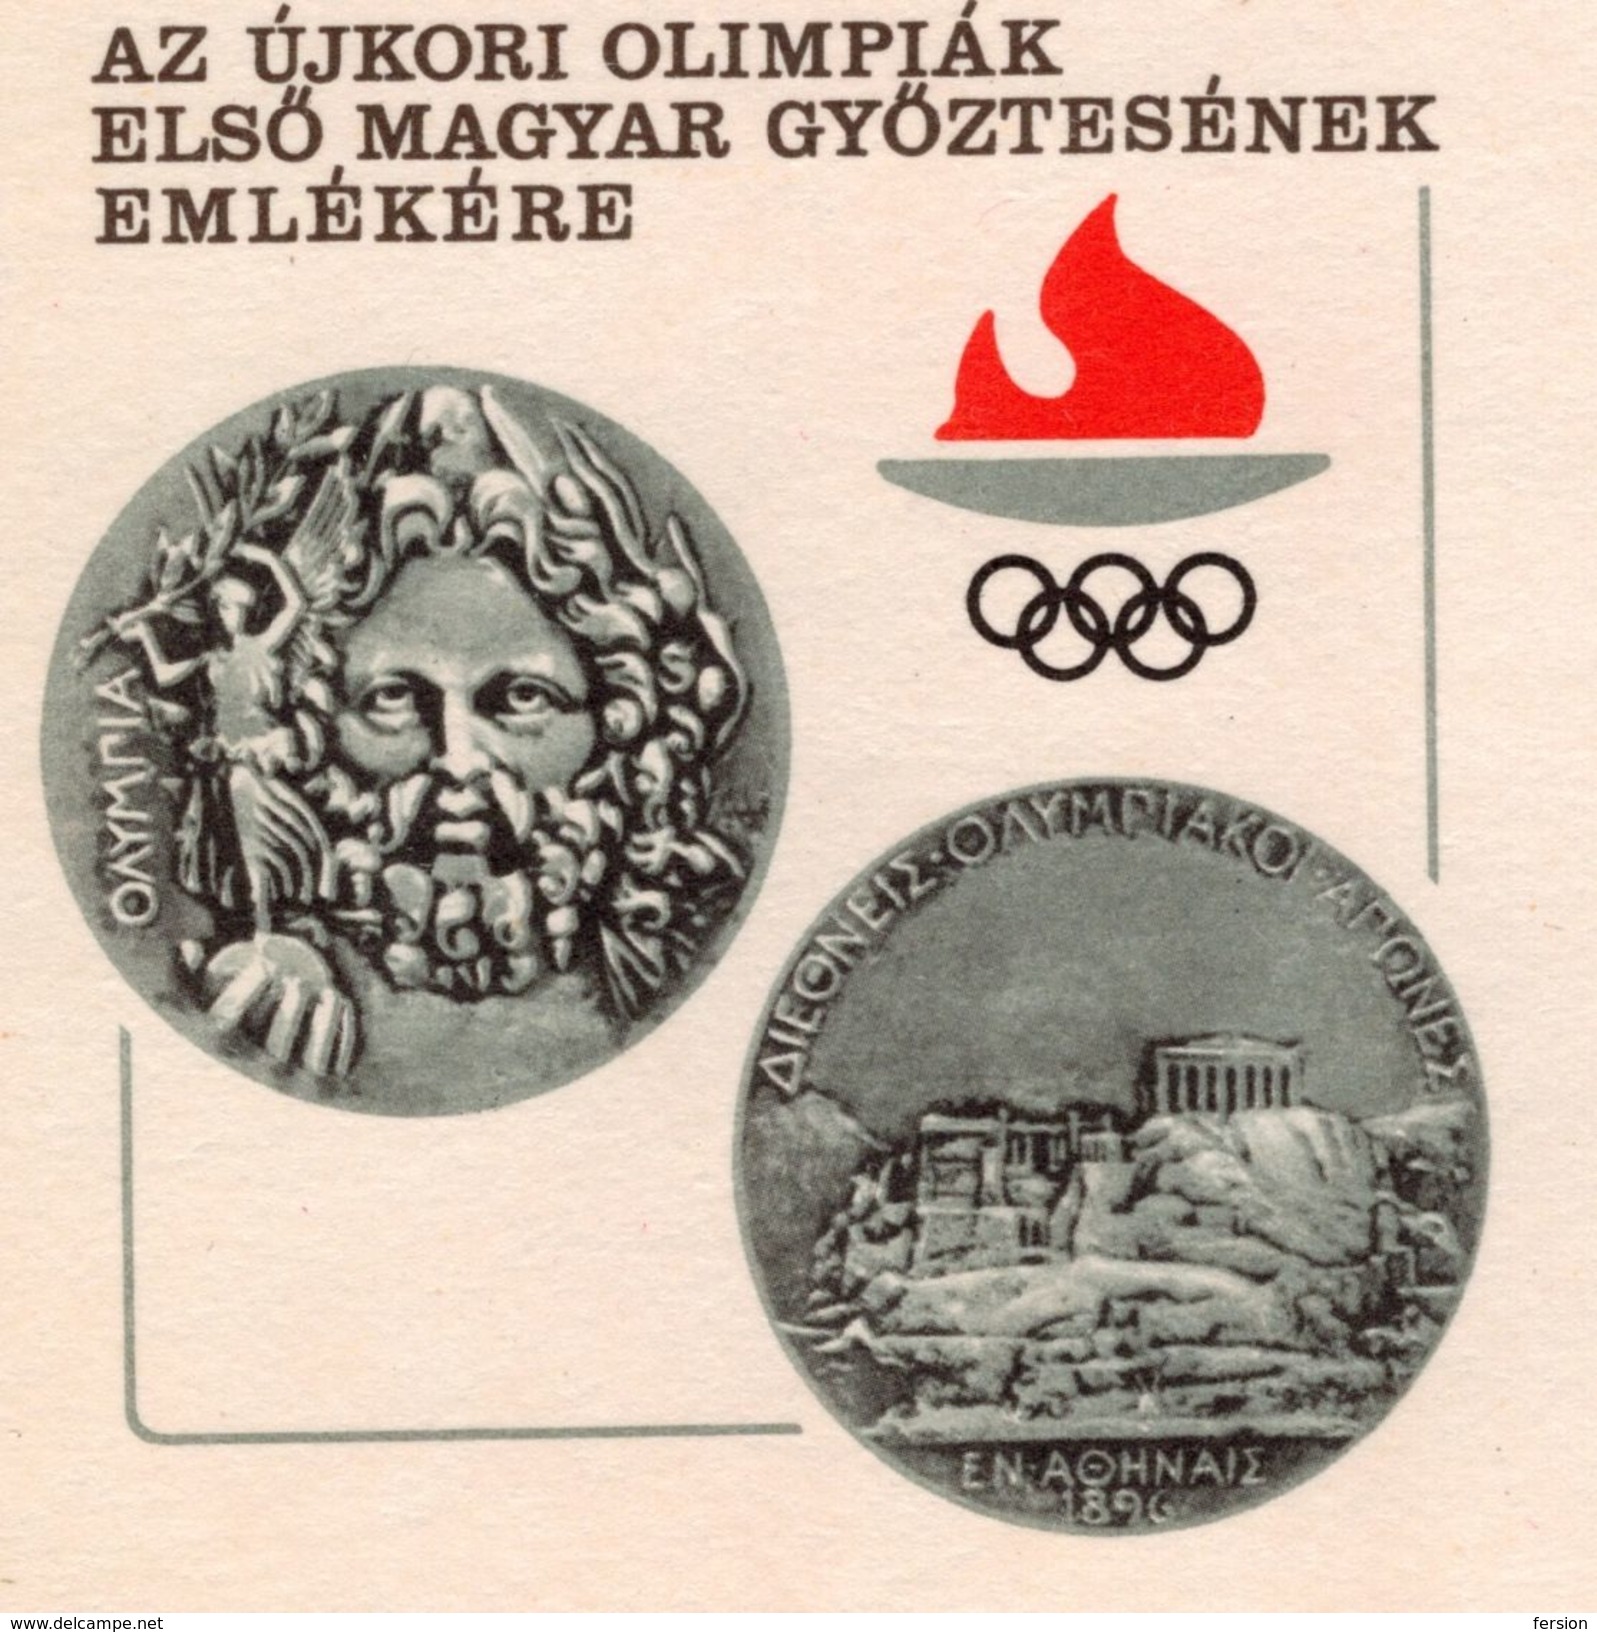 1980 1996 HUNGARY - 1st Hungarian Olympic Champion - ATHENS ACROPOLIS 1896 - Hajos Alfred - STATIONERY - POSTCARD - Ete 1896: Athènes